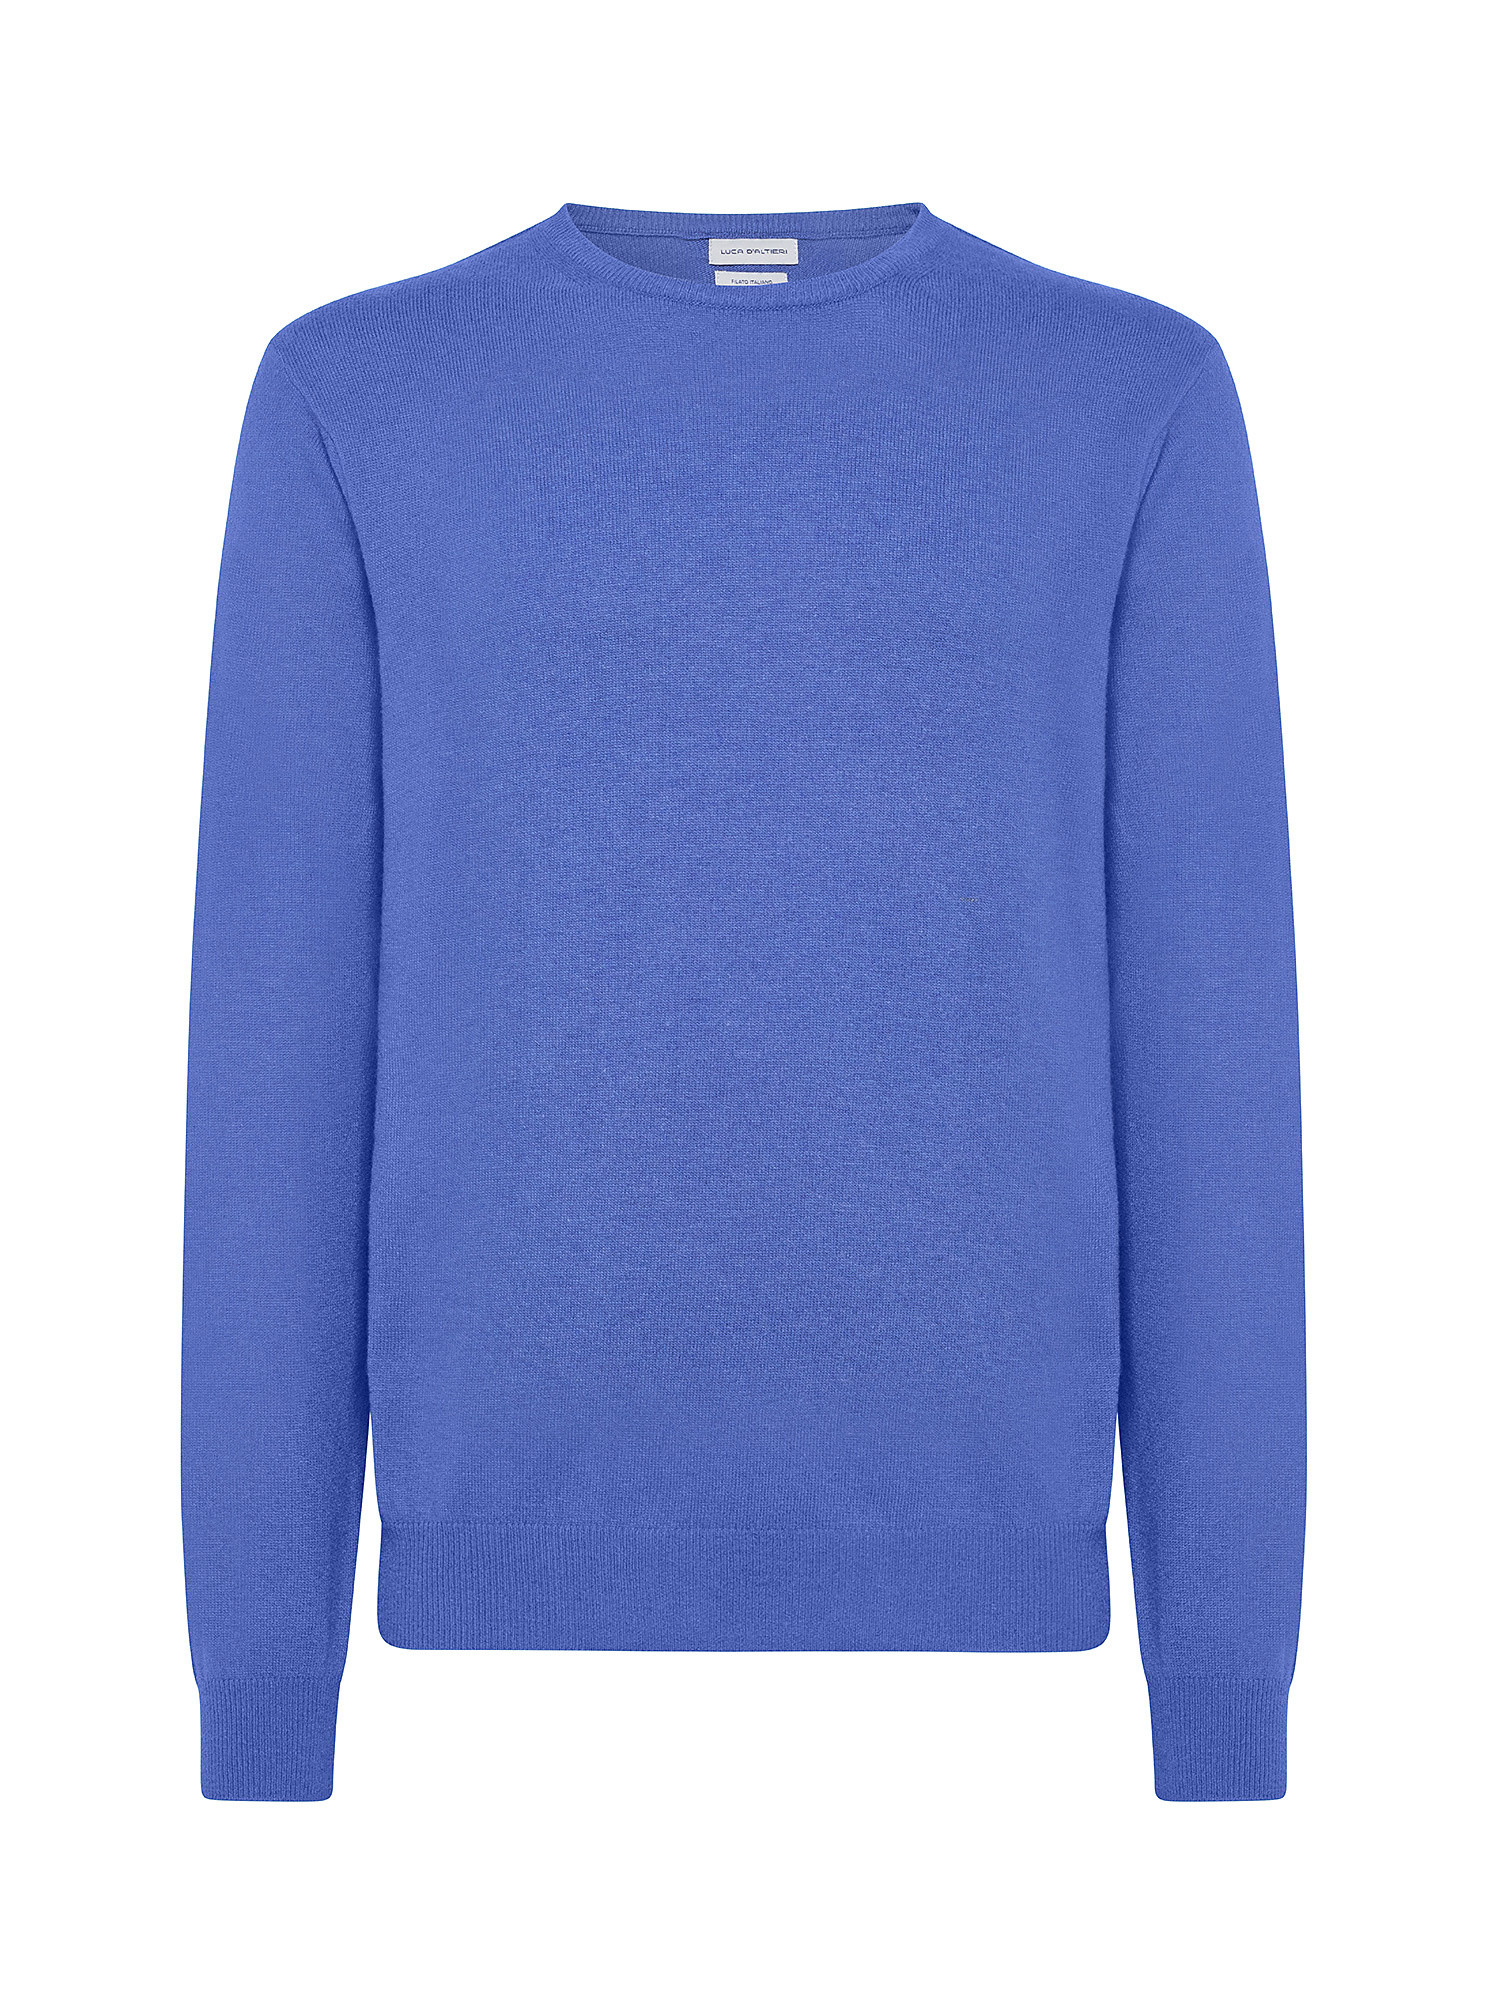 Cashmere Blend crewneck sweater with noble fibers, Aviation Blue, large image number 0